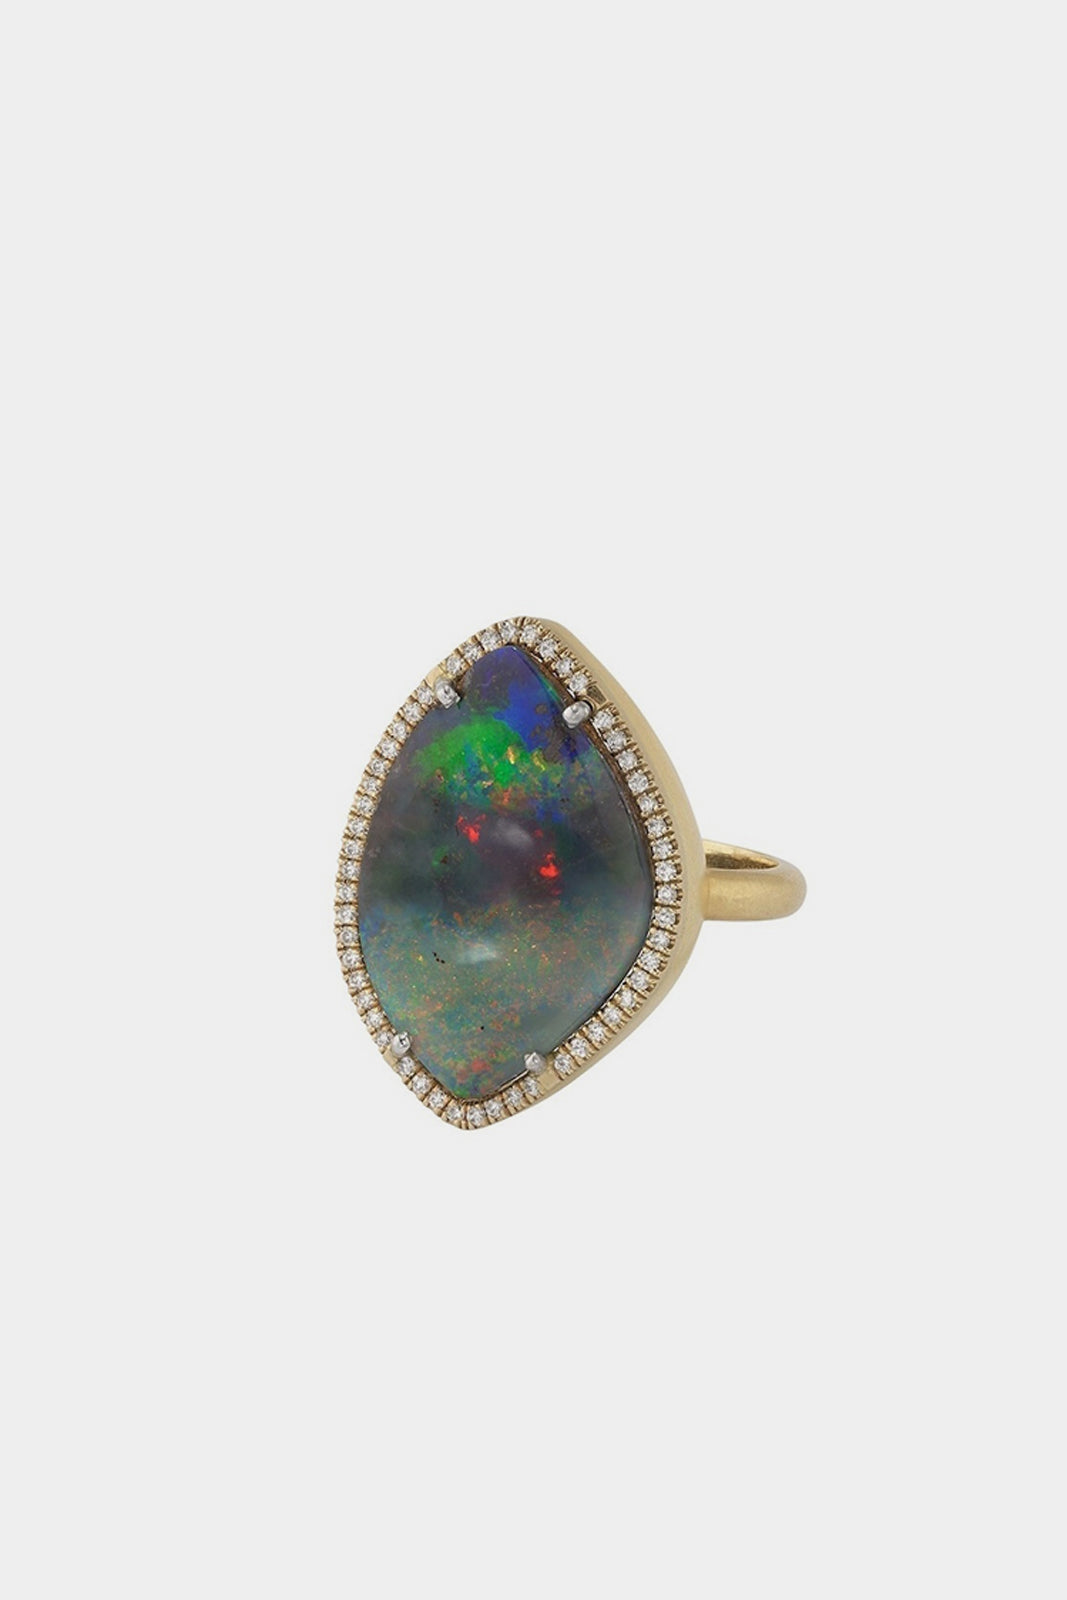 18K Yellow Gold Boulder Opal Ring with Diamond Pave